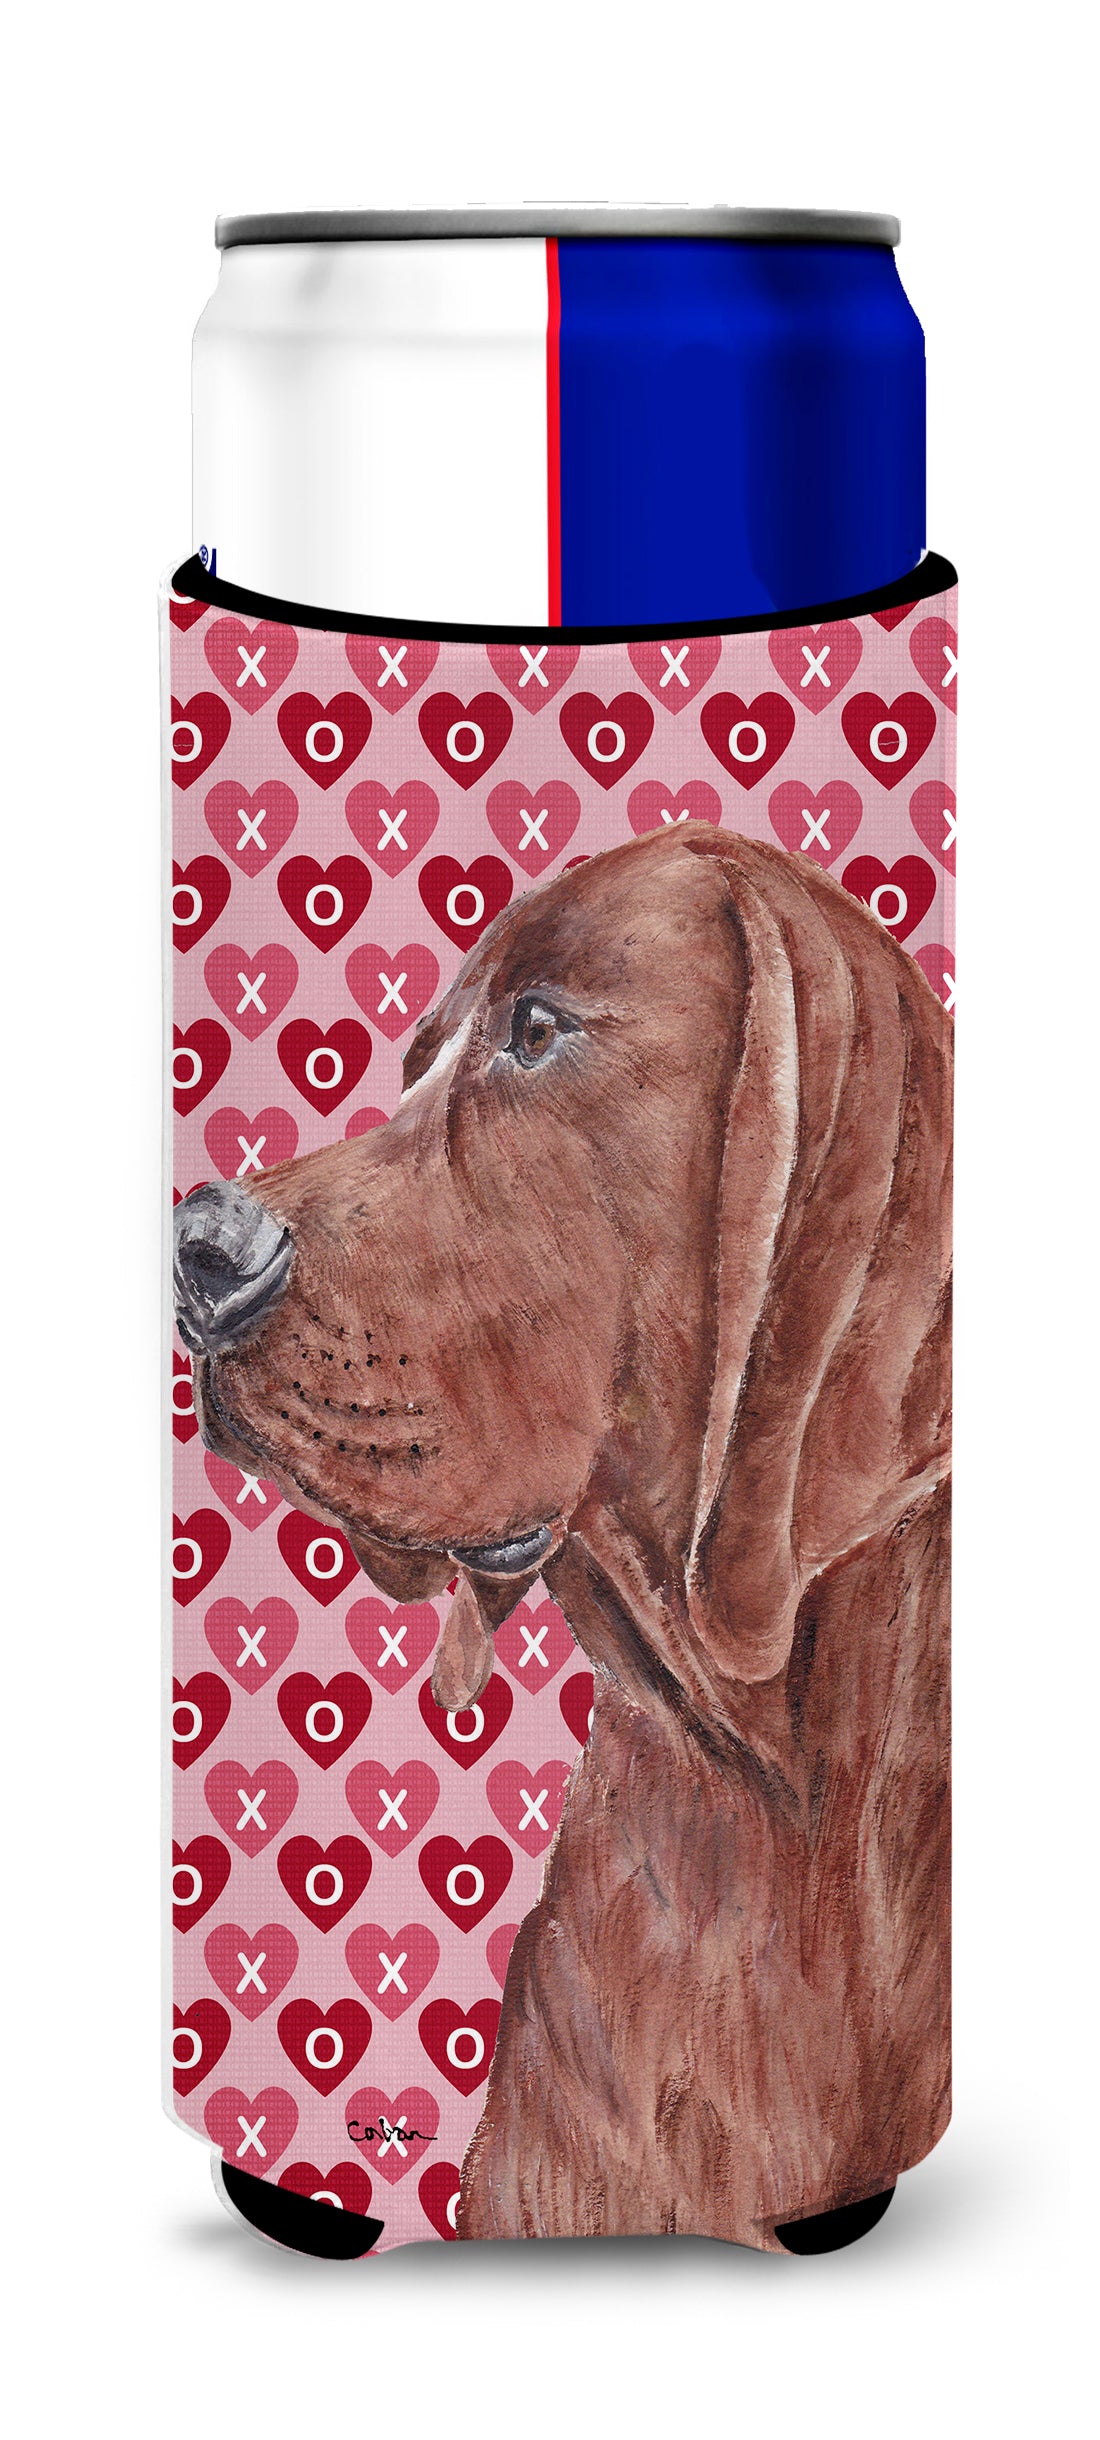 Redbone Coonhound Hearts and Love Ultra Beverage Insulators for slim cans SC9707MUK